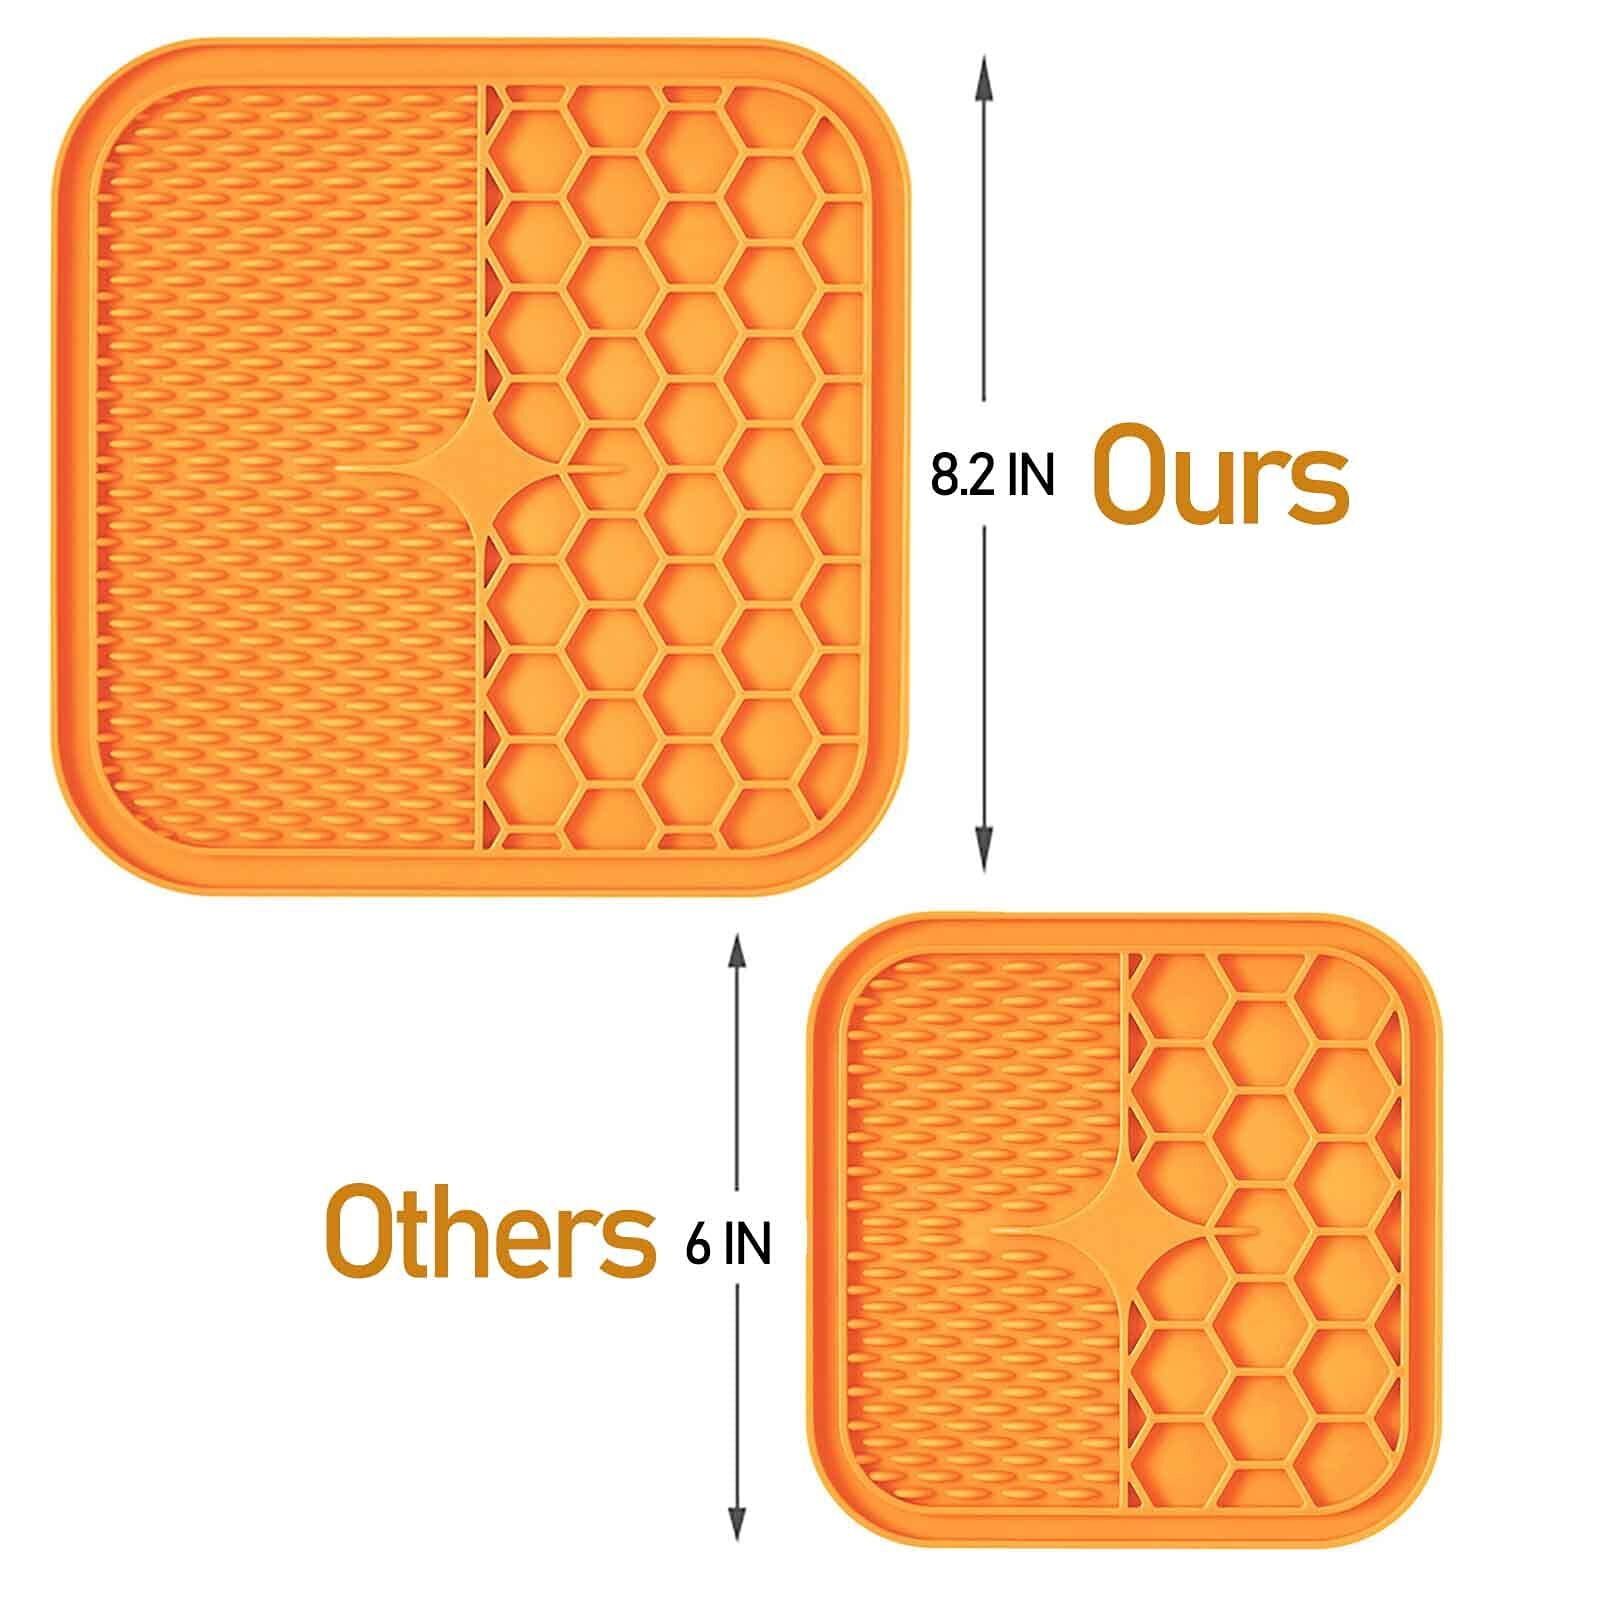 Petbank Lick Mat for Dogs and Cats - 3 Pcs Valued-Pack Dog Licking Mat with  Suction Cups, Dog Peanut Butter Lick Pad for Anxiety Relief and Slow Feed